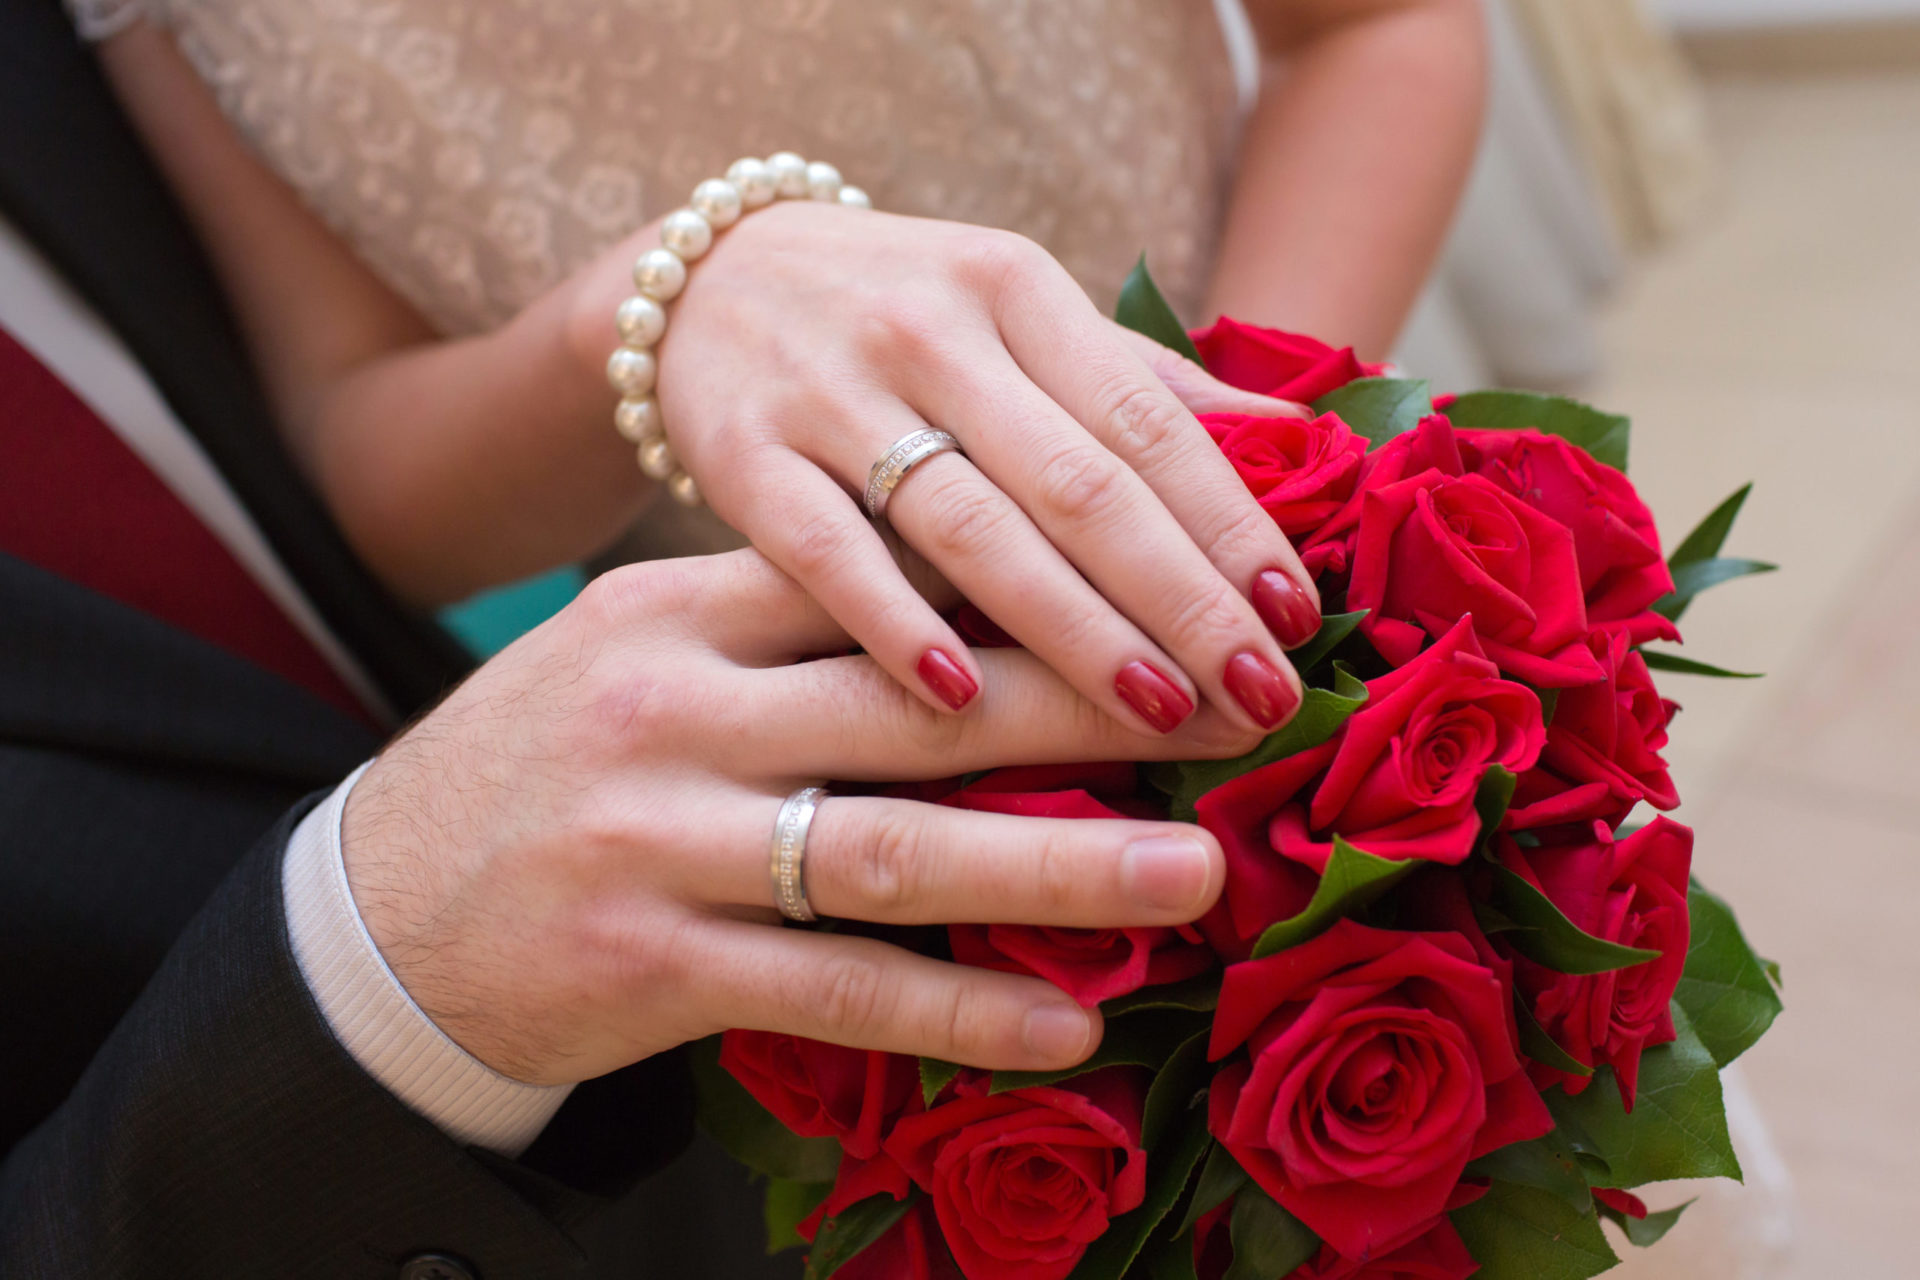 Hands of the groom and the bride with wedding rings on wedding bouquet